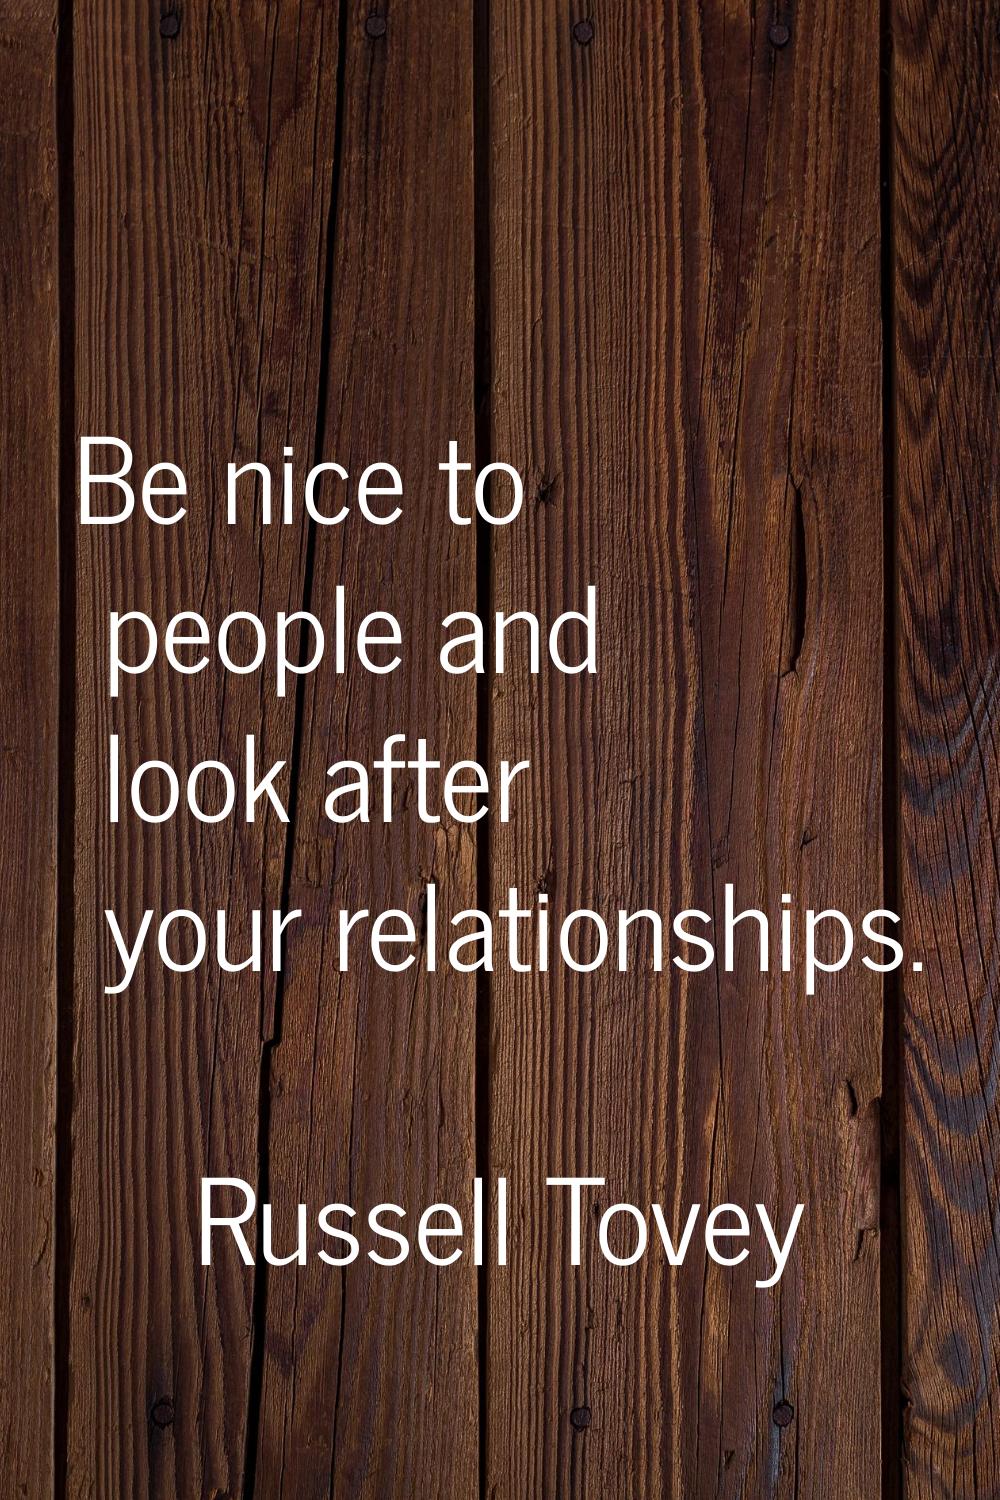 Be nice to people and look after your relationships.